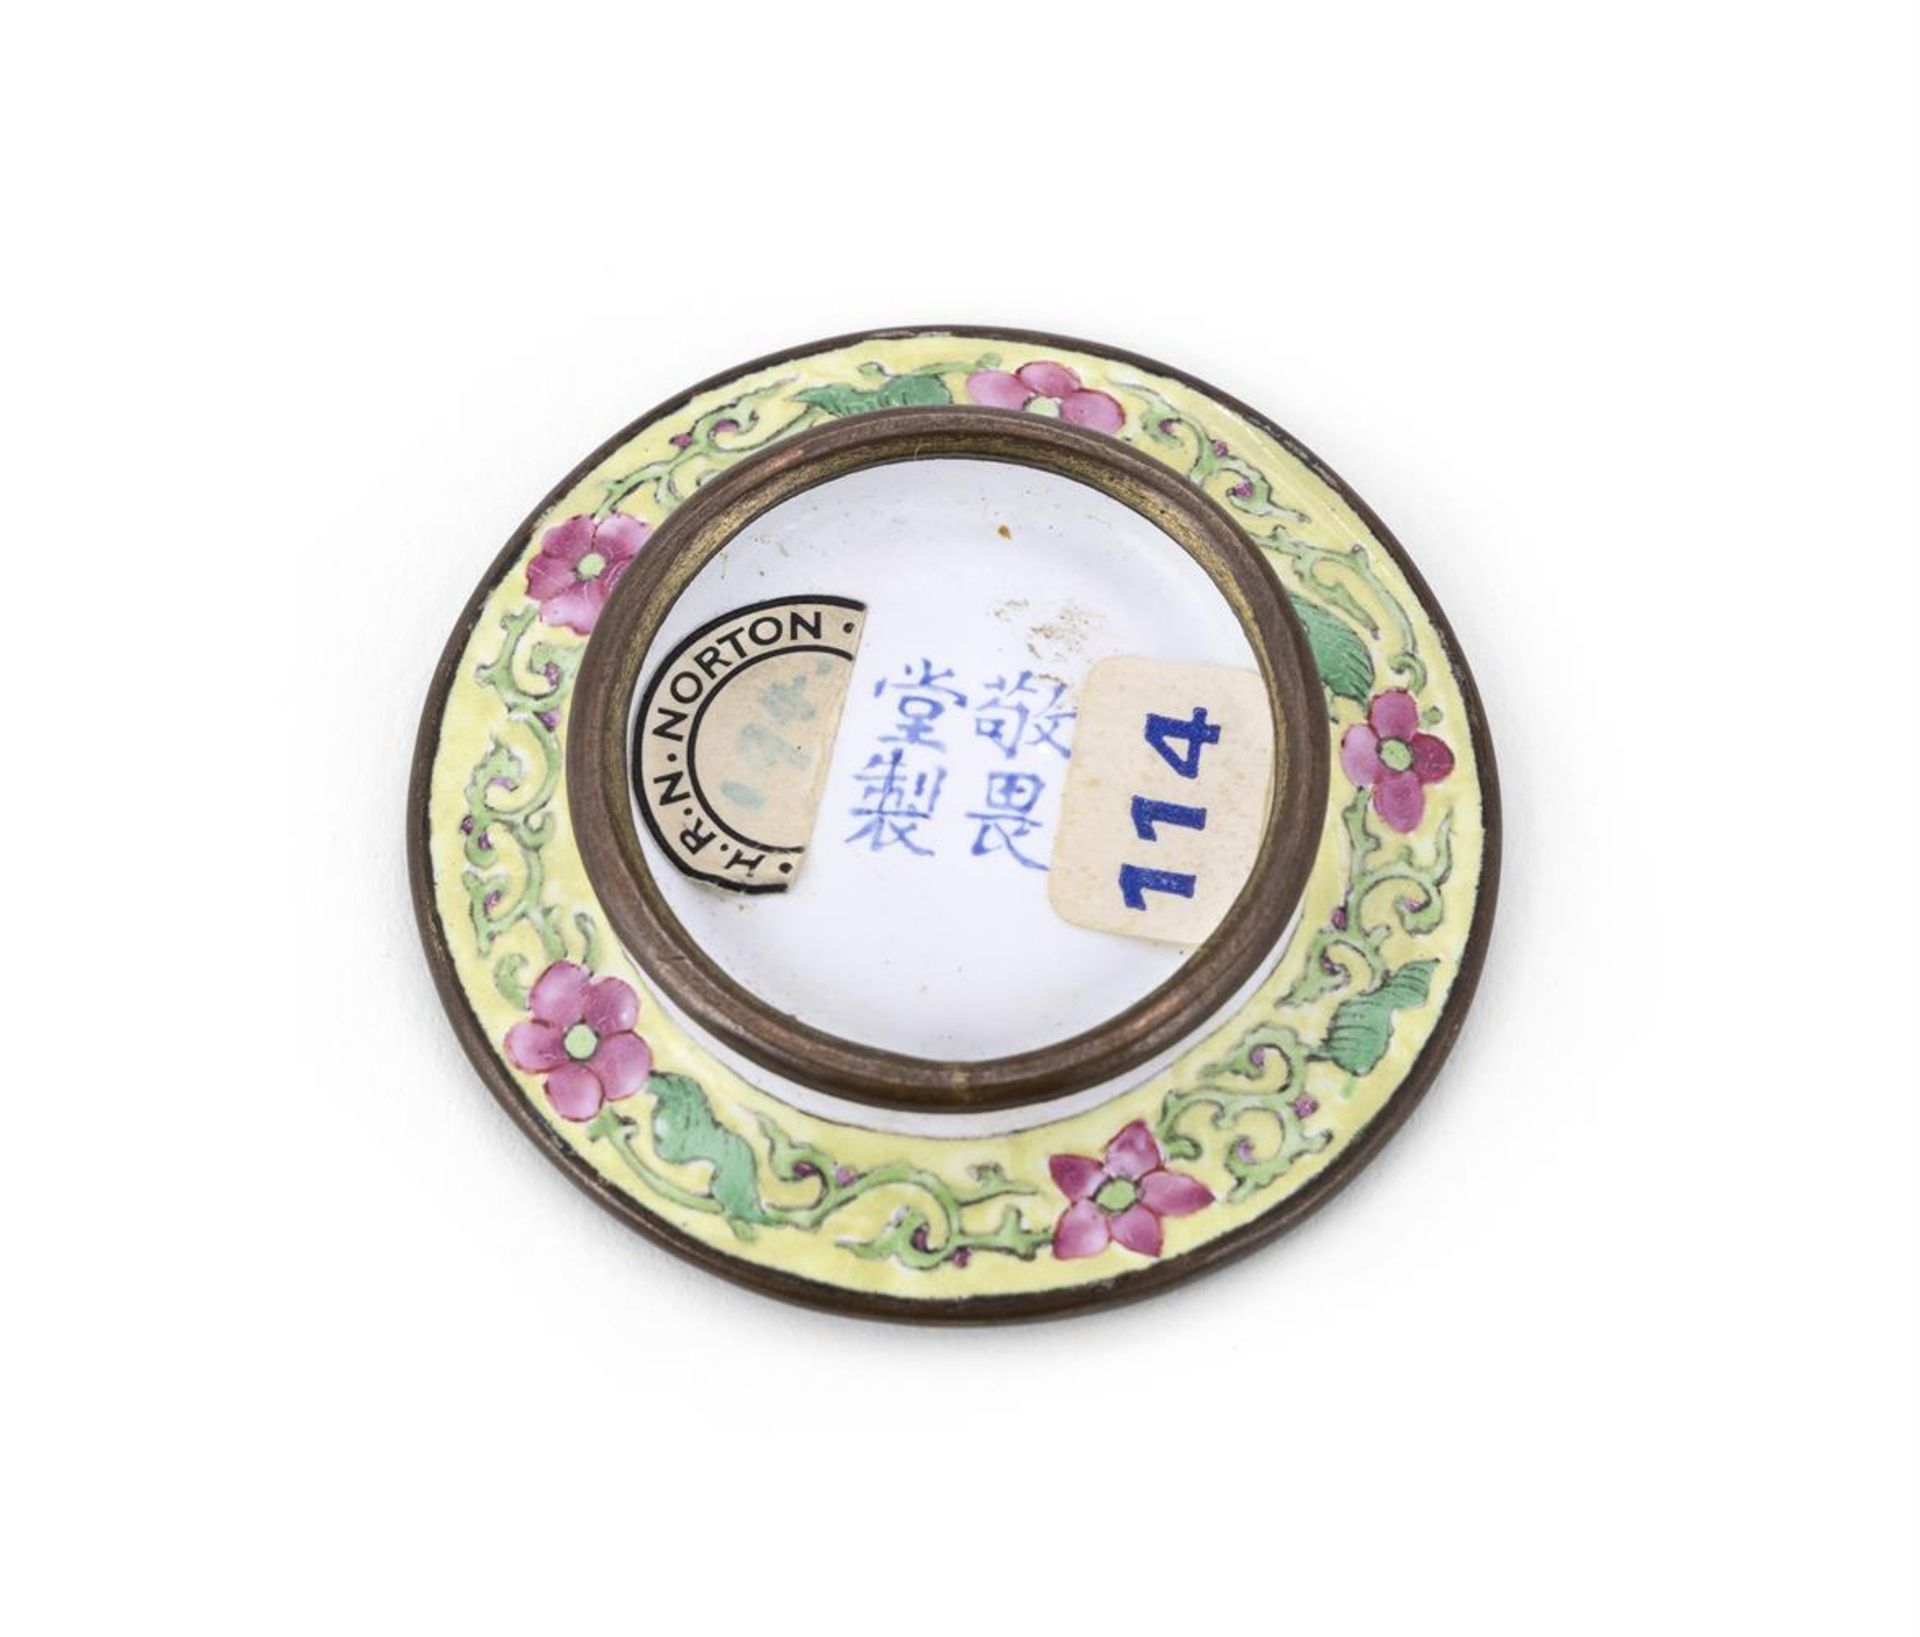 A SMALL CHINESE CANTON ENAMEL SNUFF DISH, QIANLONG PERIOD (1736-1795) - Image 2 of 8